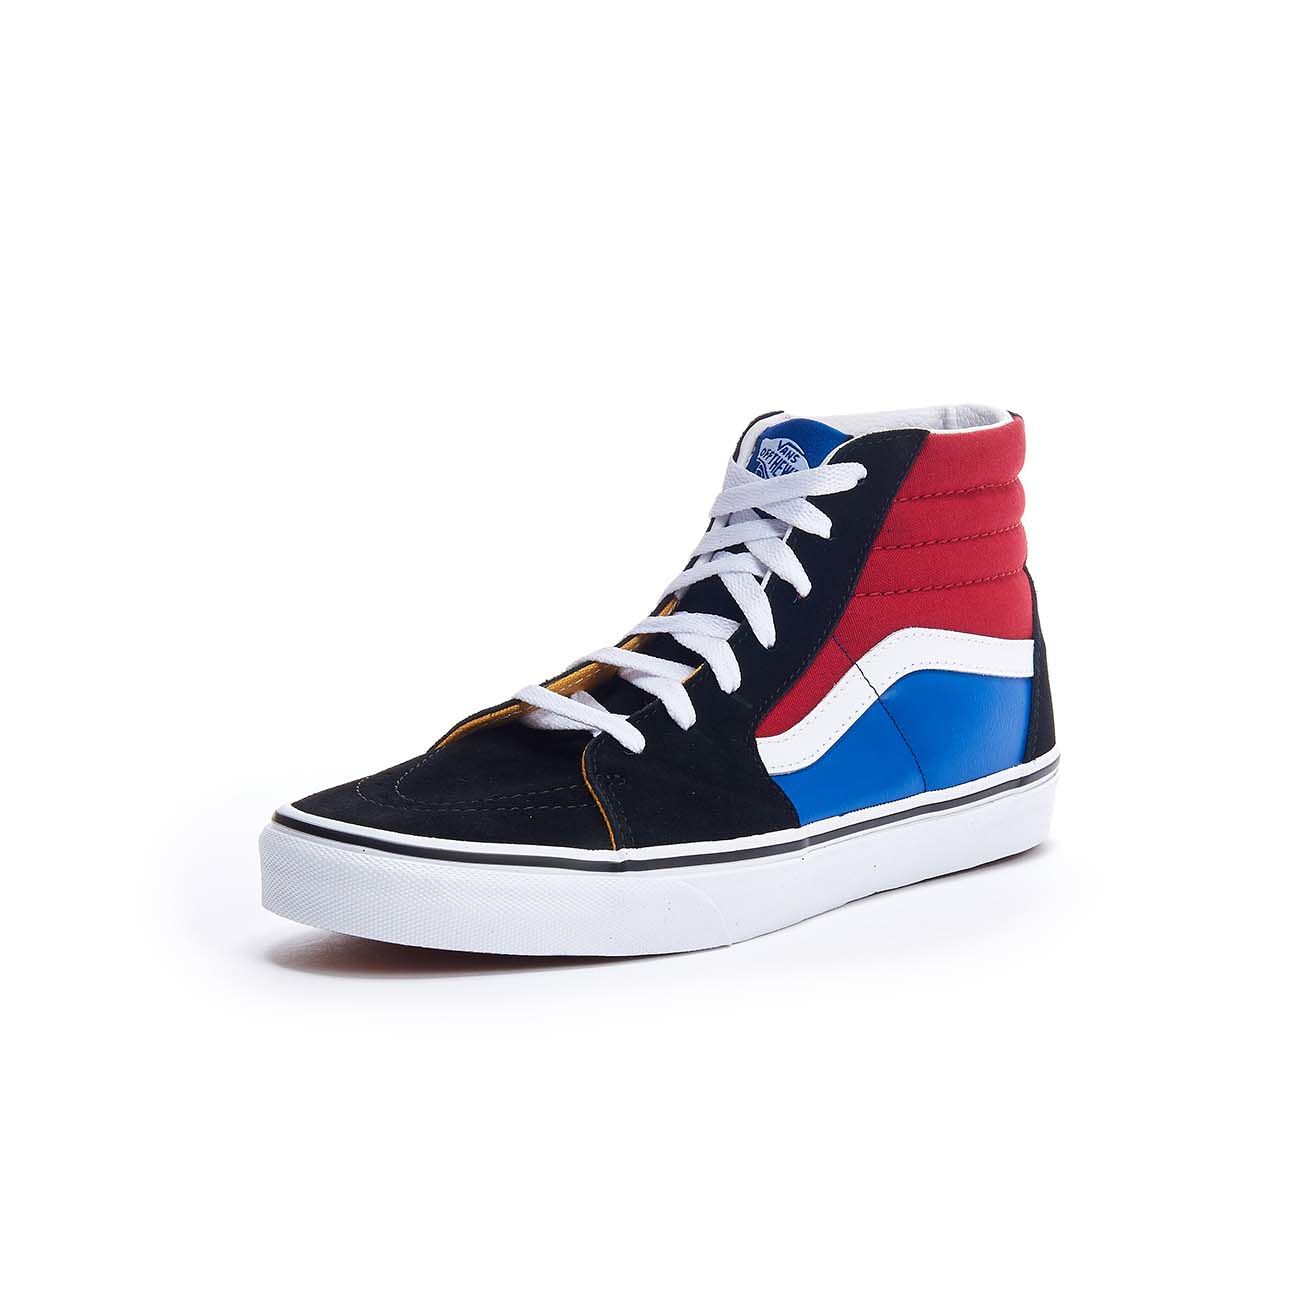 ECO-LEATHER Pepper FABRIC AND Chilli IN HIGH SK8-HI Kid Mascheroni VANS Black | SNEAKER Store